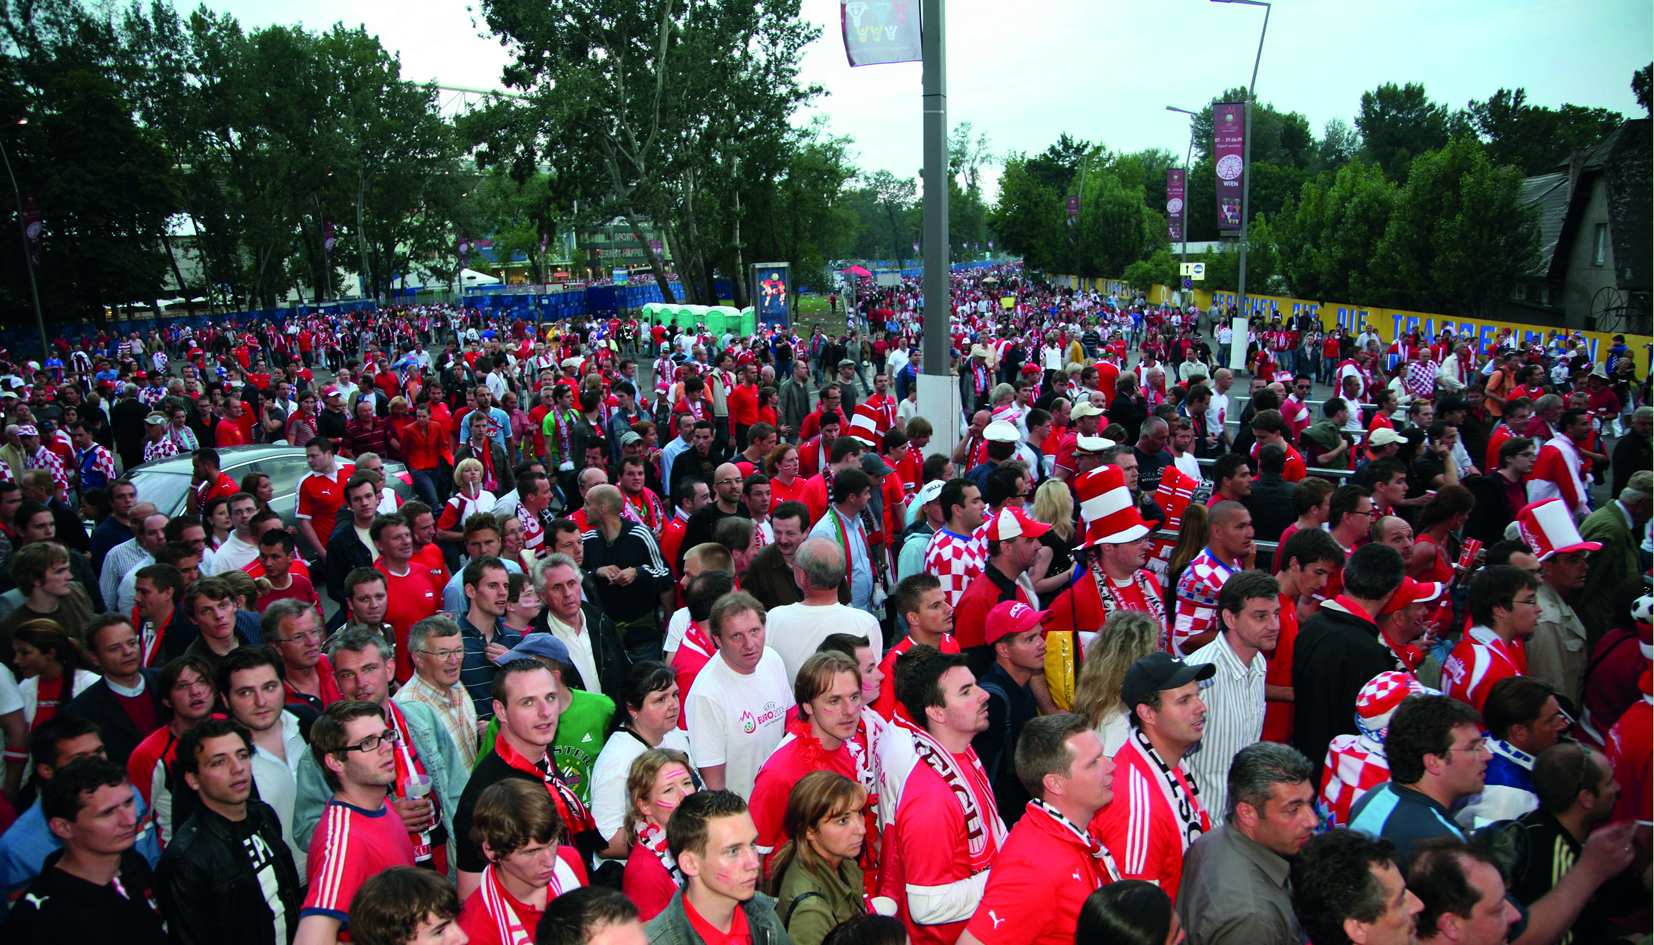 Crowd of people wearing red jerseys and hats